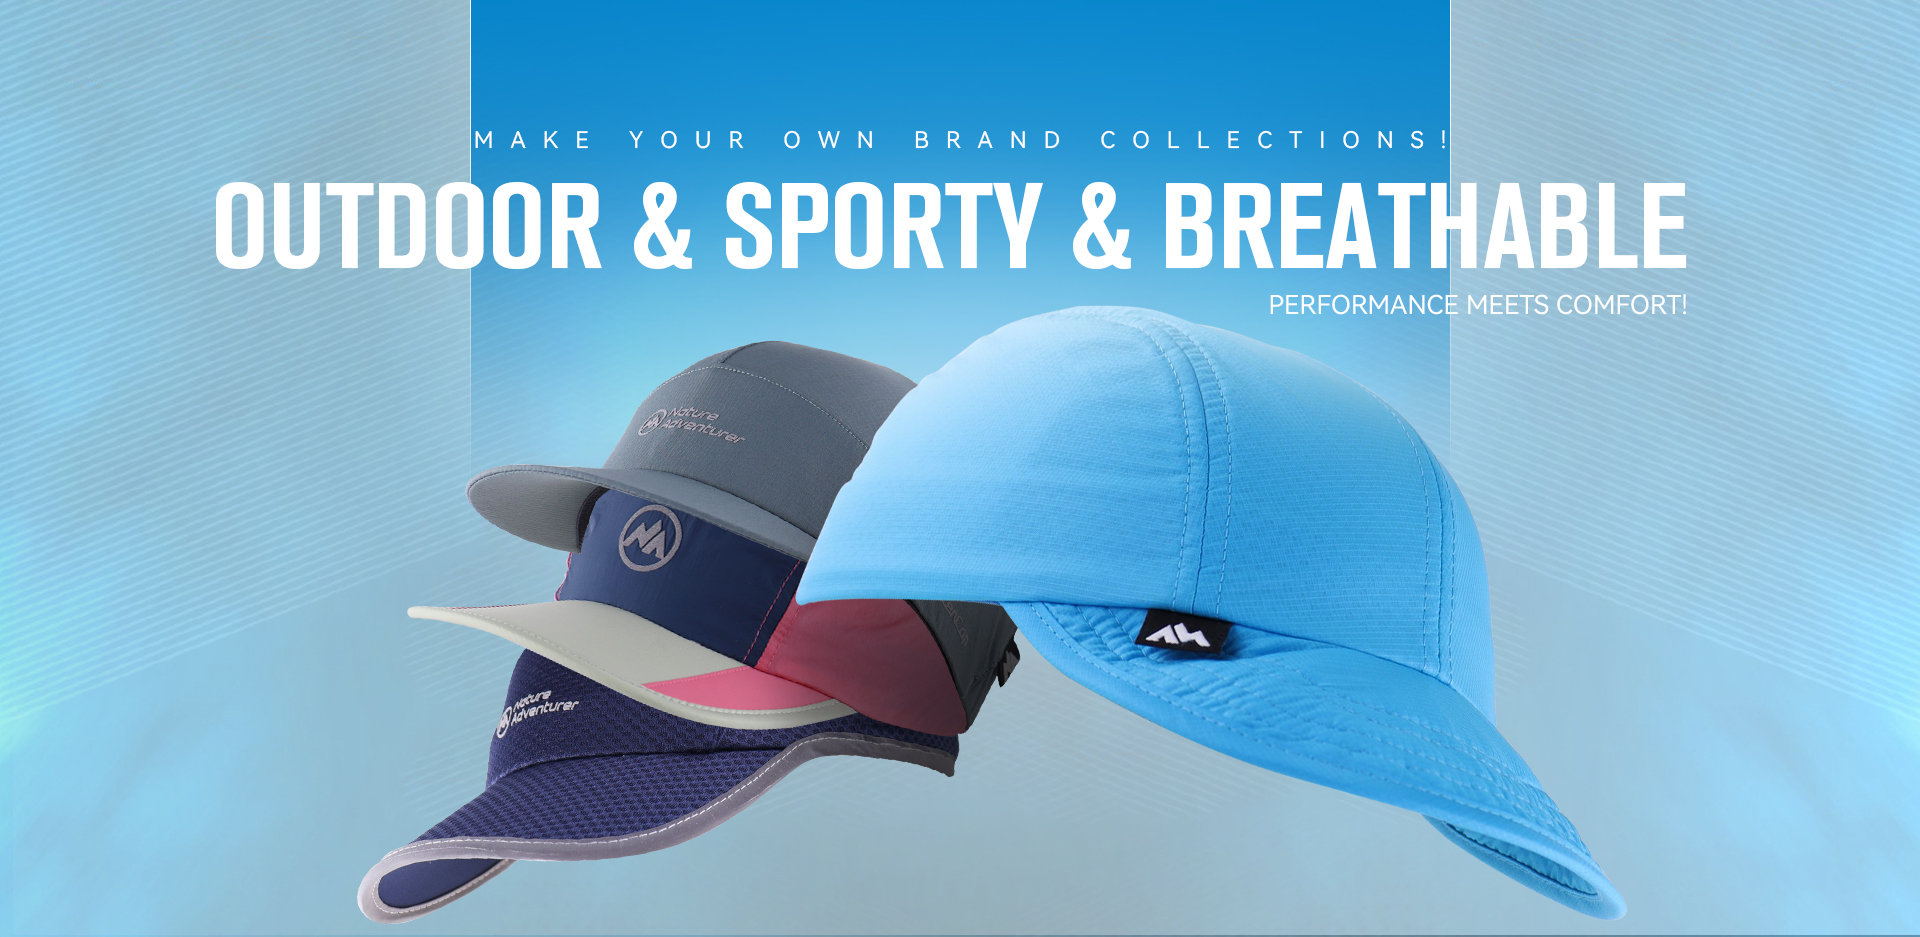 OUTDOOR & SPORTY & BREATHABLE